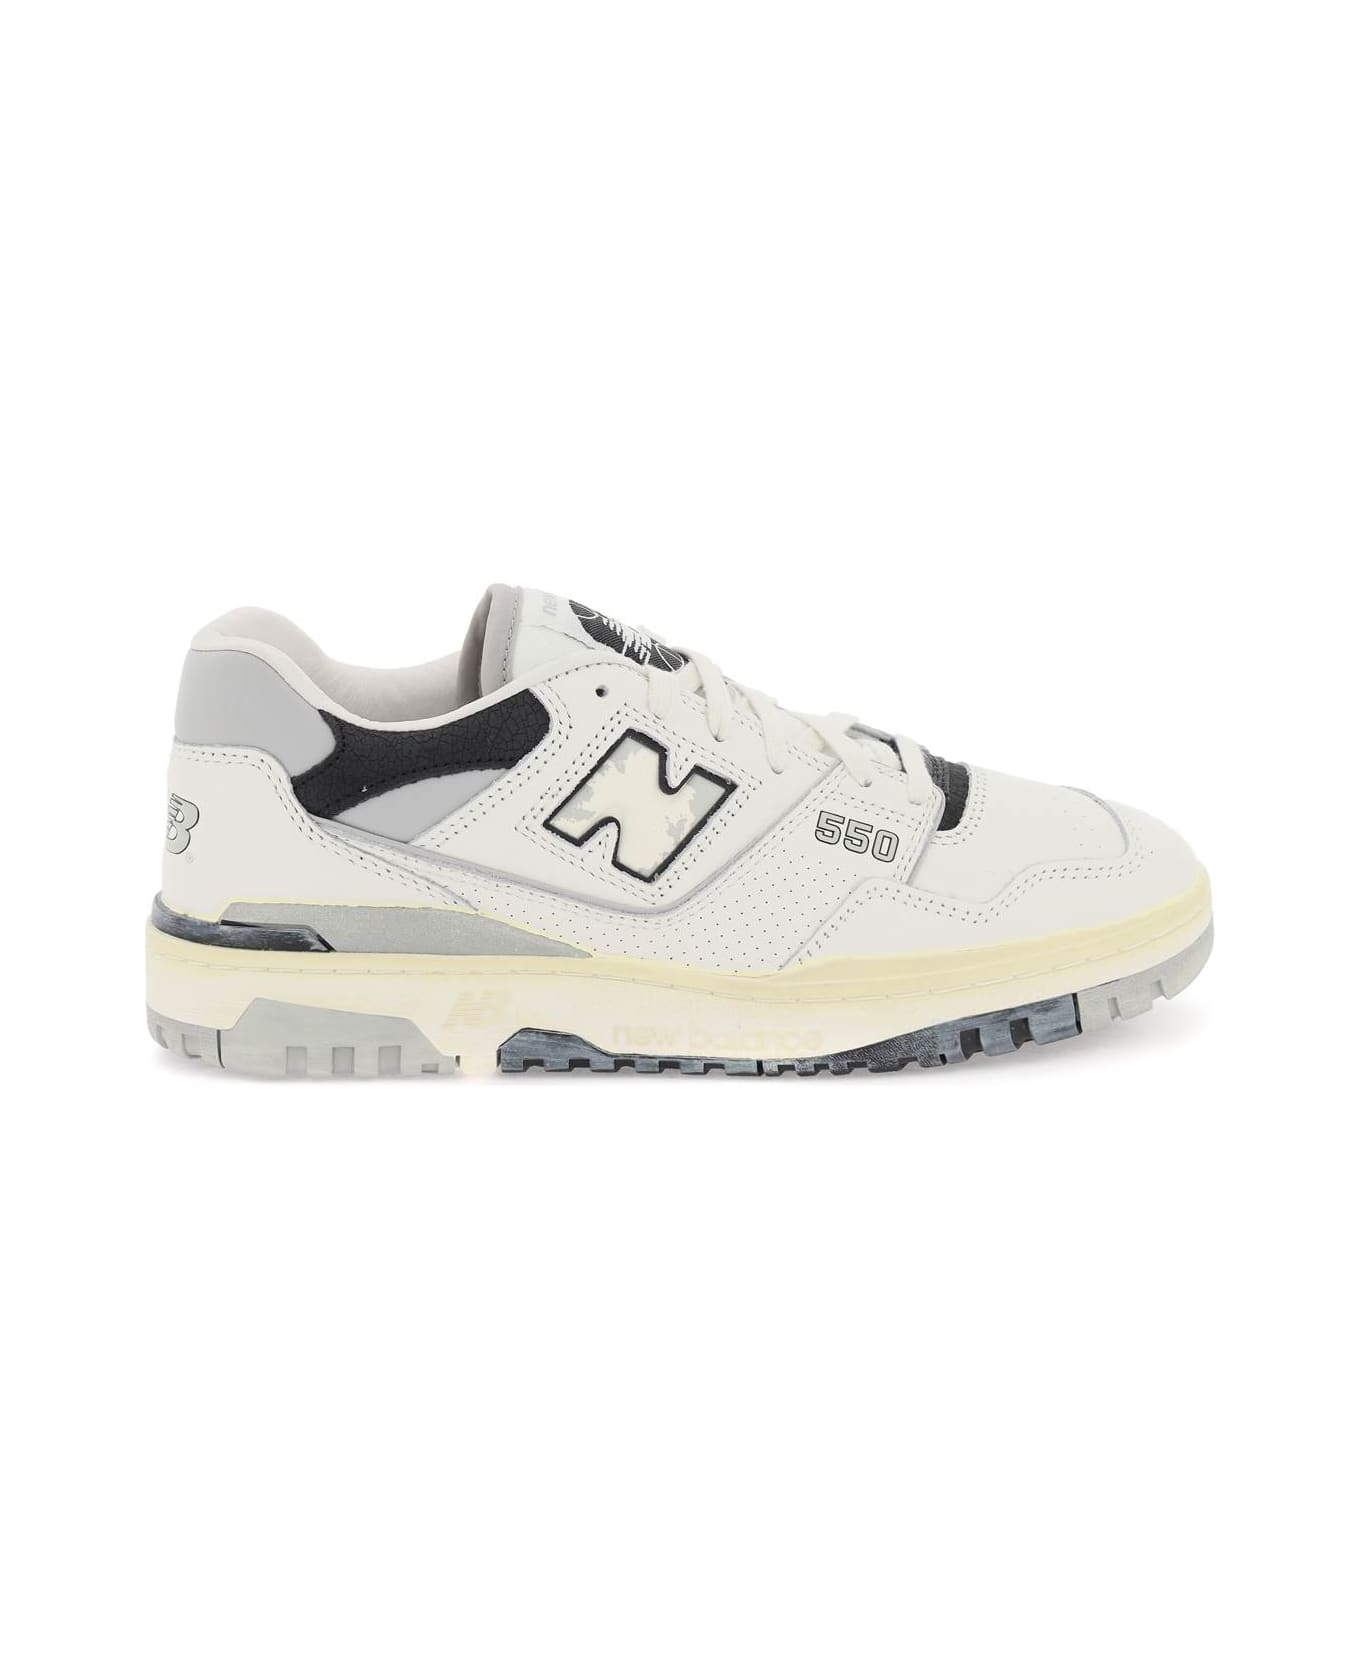 New Balance Vintage-effect 550 Sneakers - OFF WHITE GREY (White)